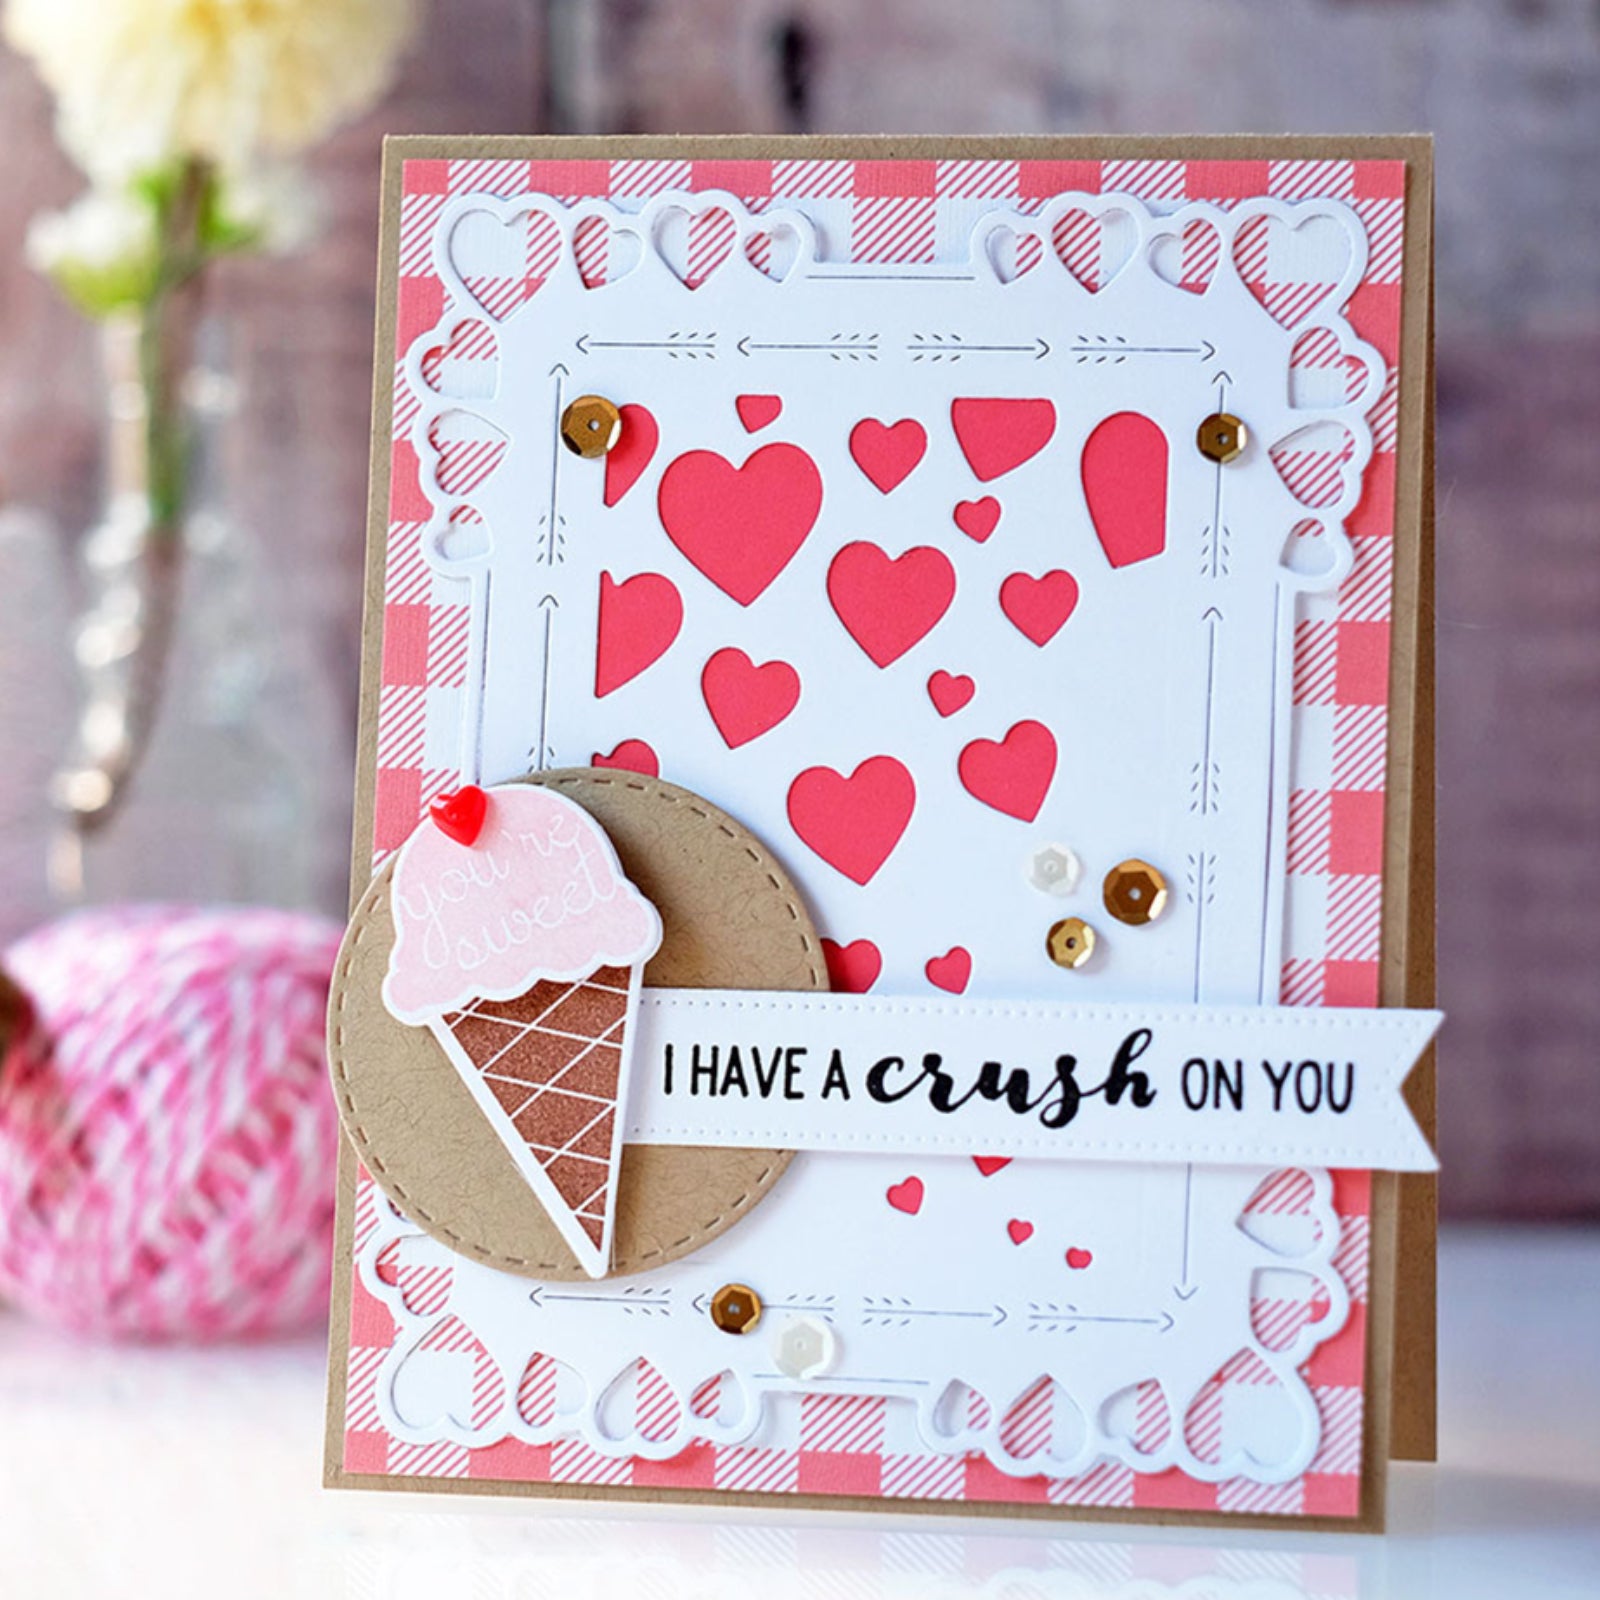 Hearts Backgrounds w Arrows Frame Cutting Dies